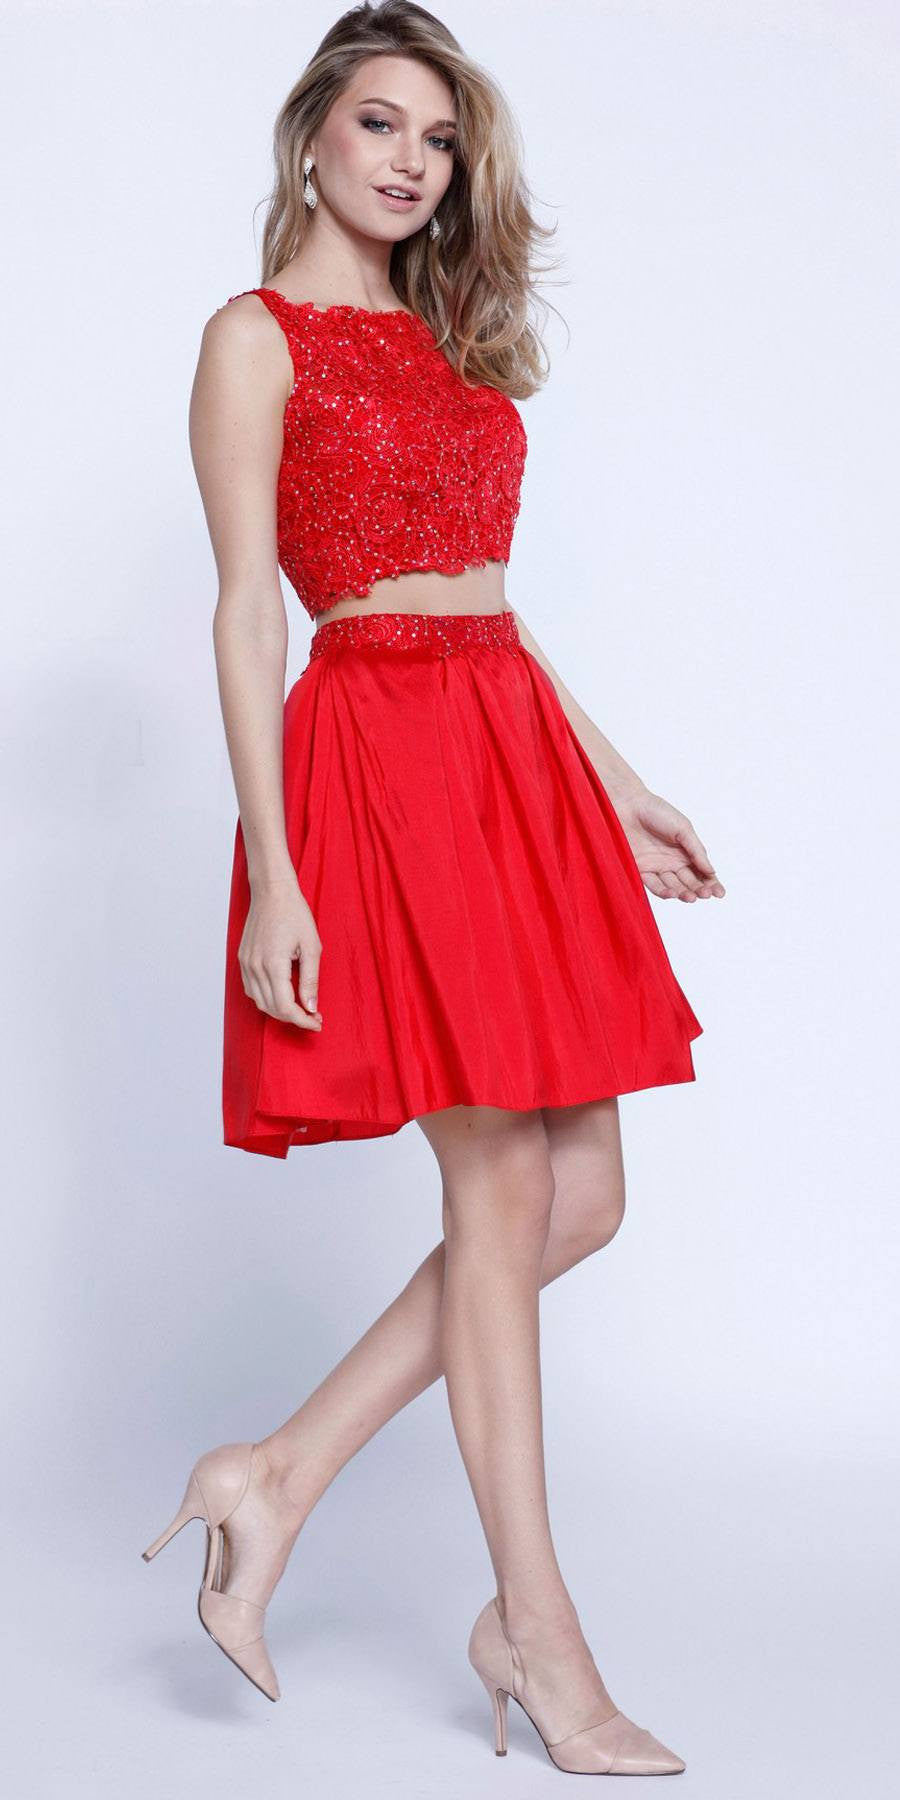 V-Shape Back Applique Crop Top Two-Piece Homecoming Short Dress Red